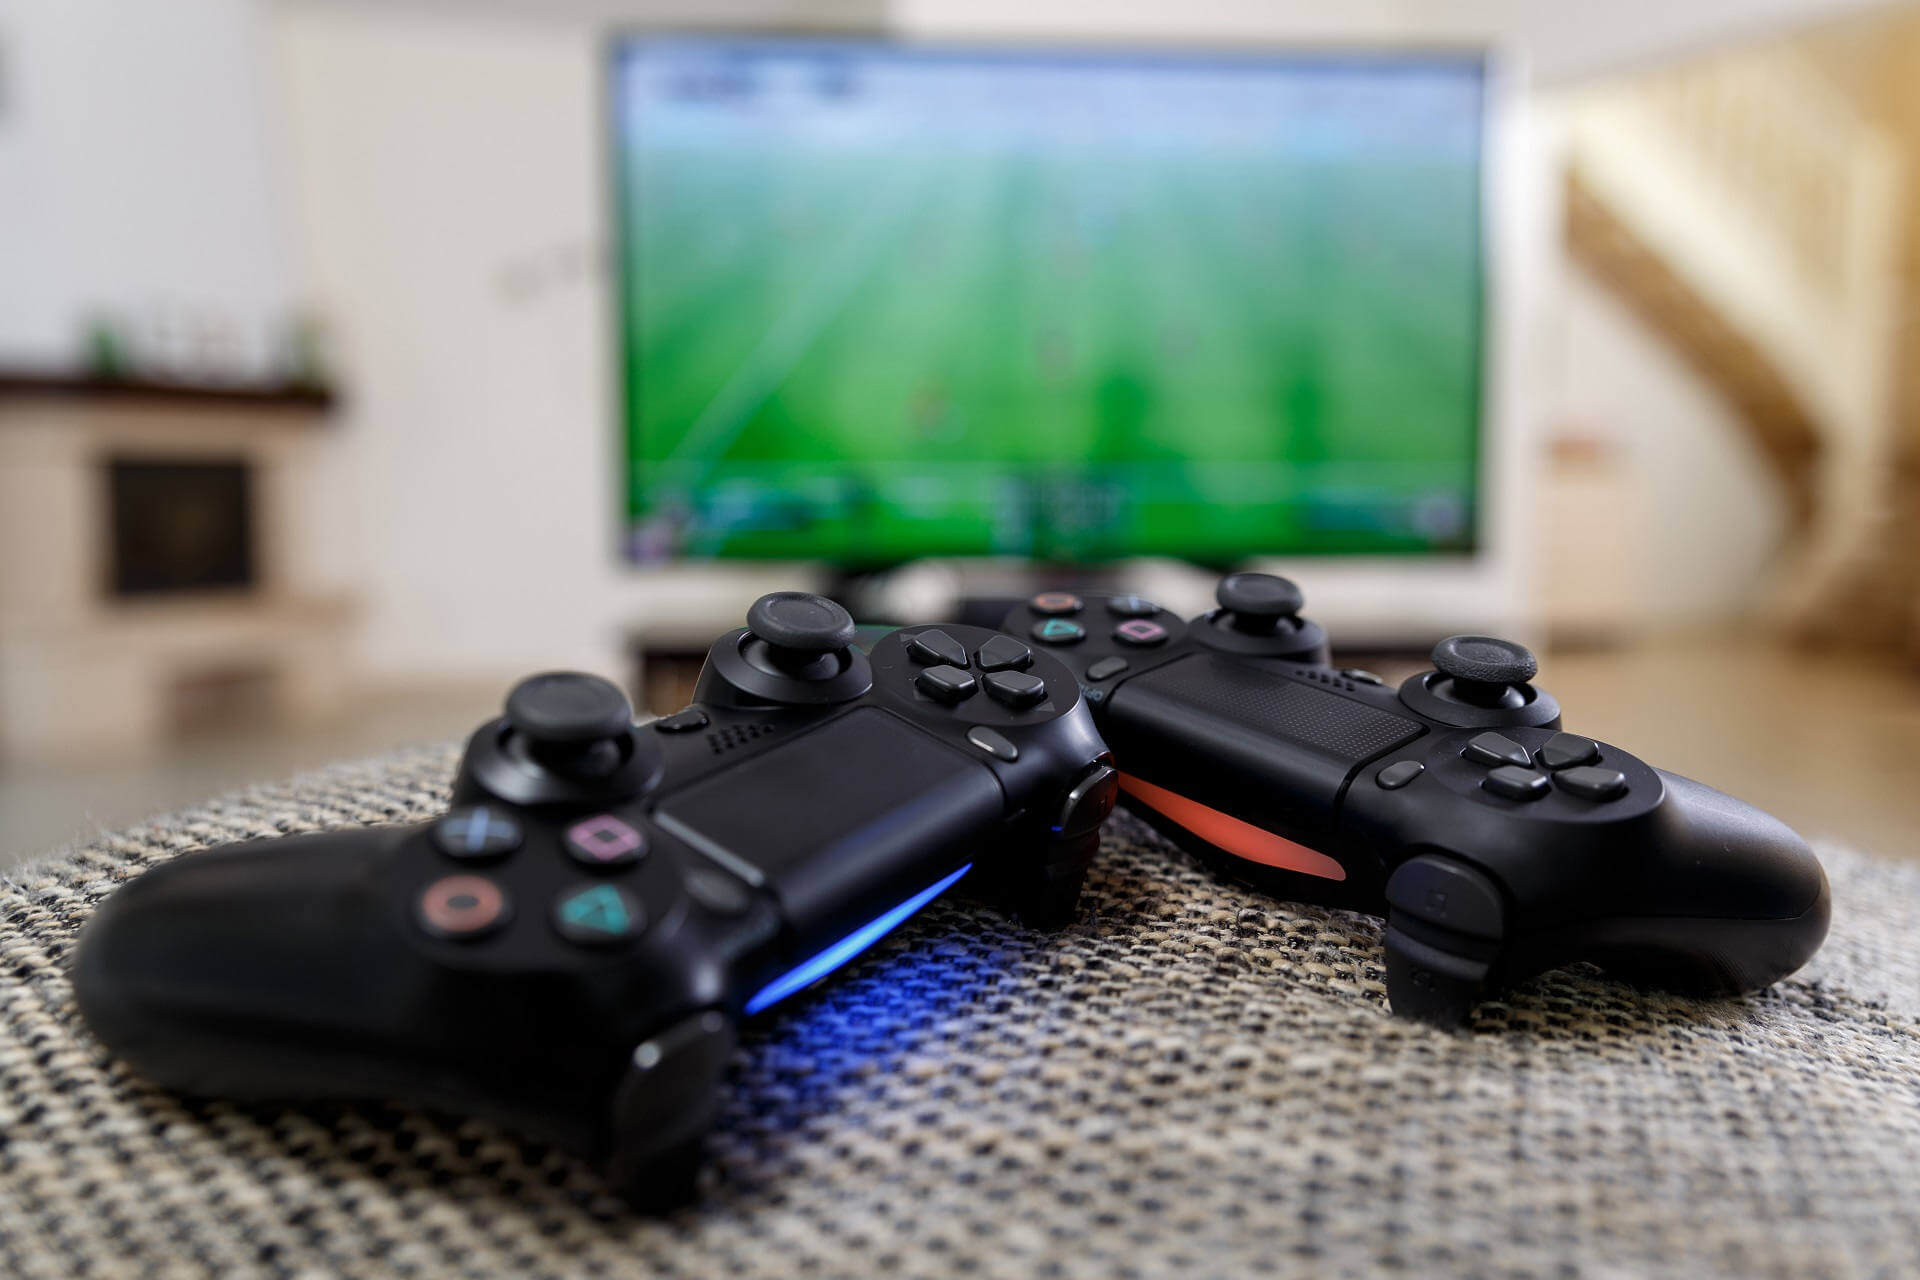 film Continent Impolite How to connect a PS4 controller to Windows 10